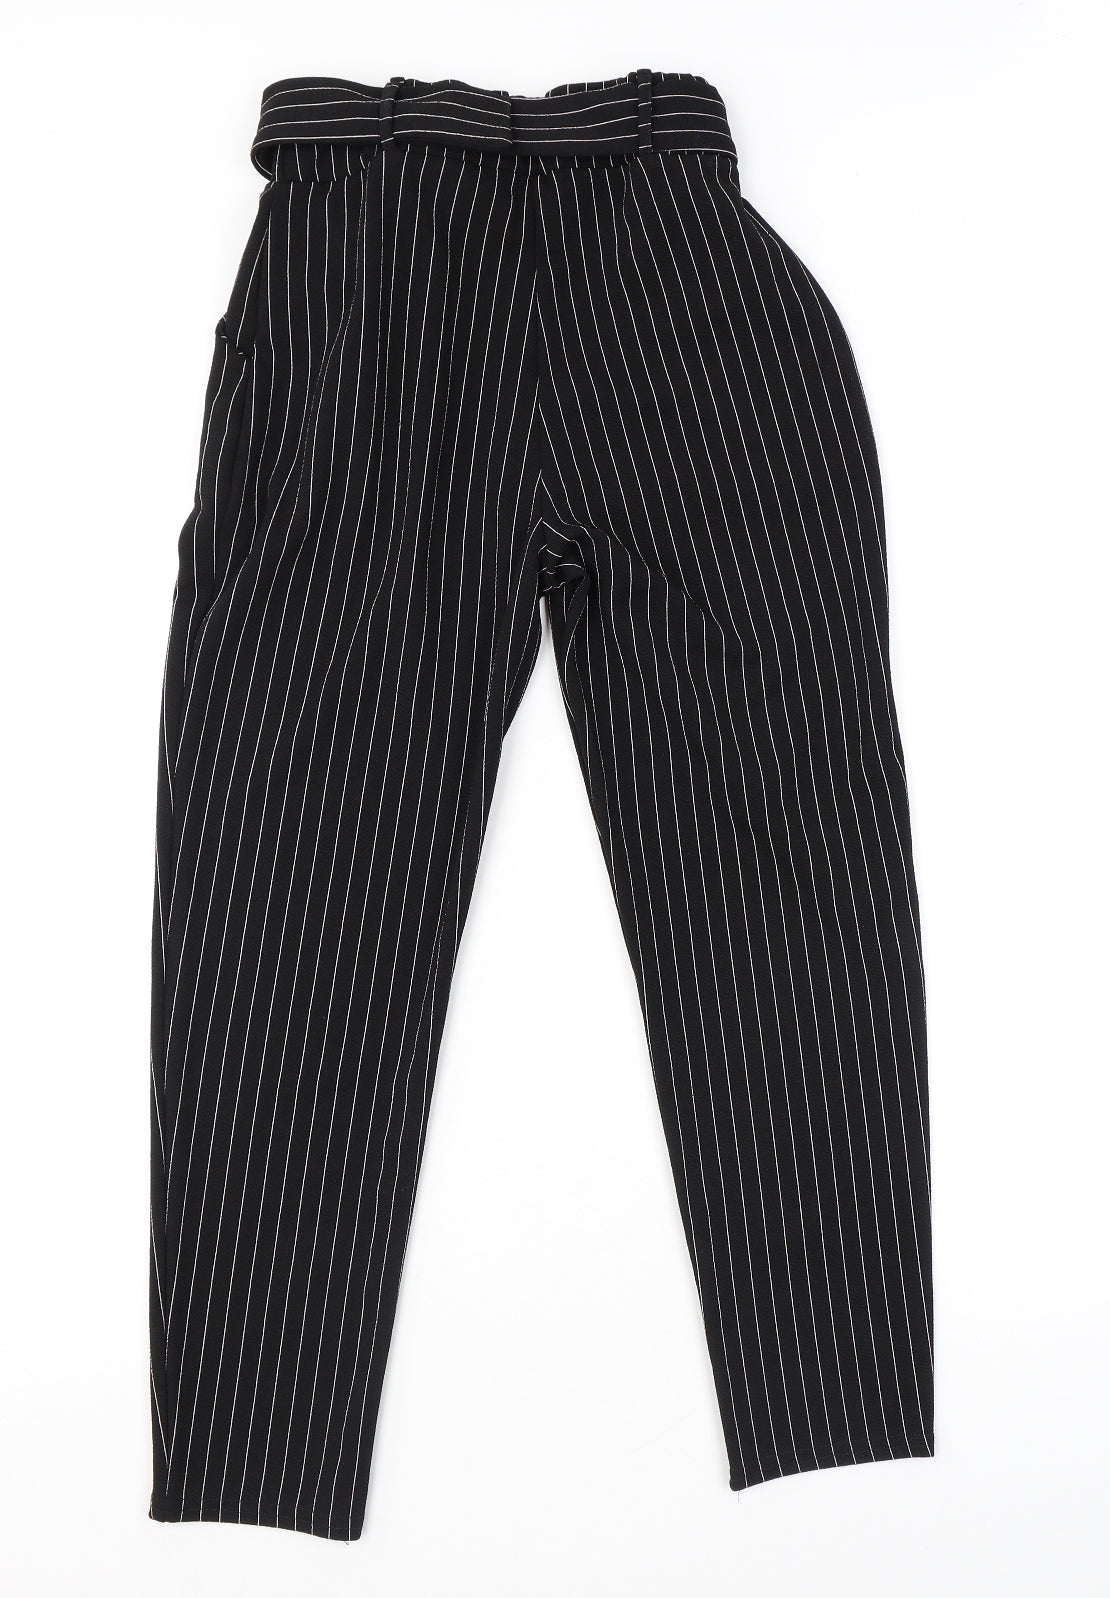 Boohoo Womens Black Striped Polyester Trousers Size 12 L26 in Regular Buckle - Belted Paperbag Waist